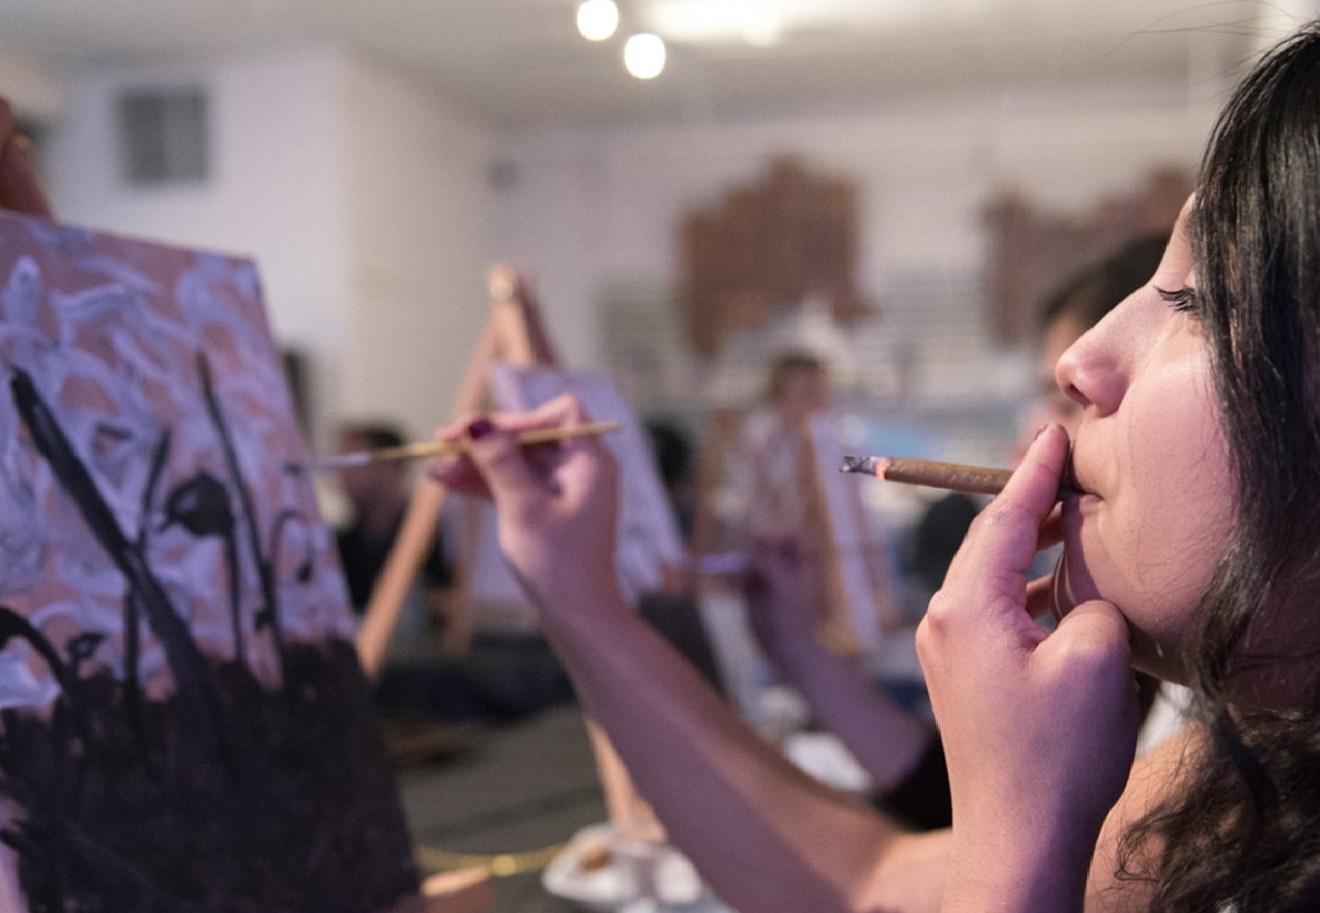 Tetra 9 holds pot-infused events throughout the week, but isn't licensed by the City of Denver.